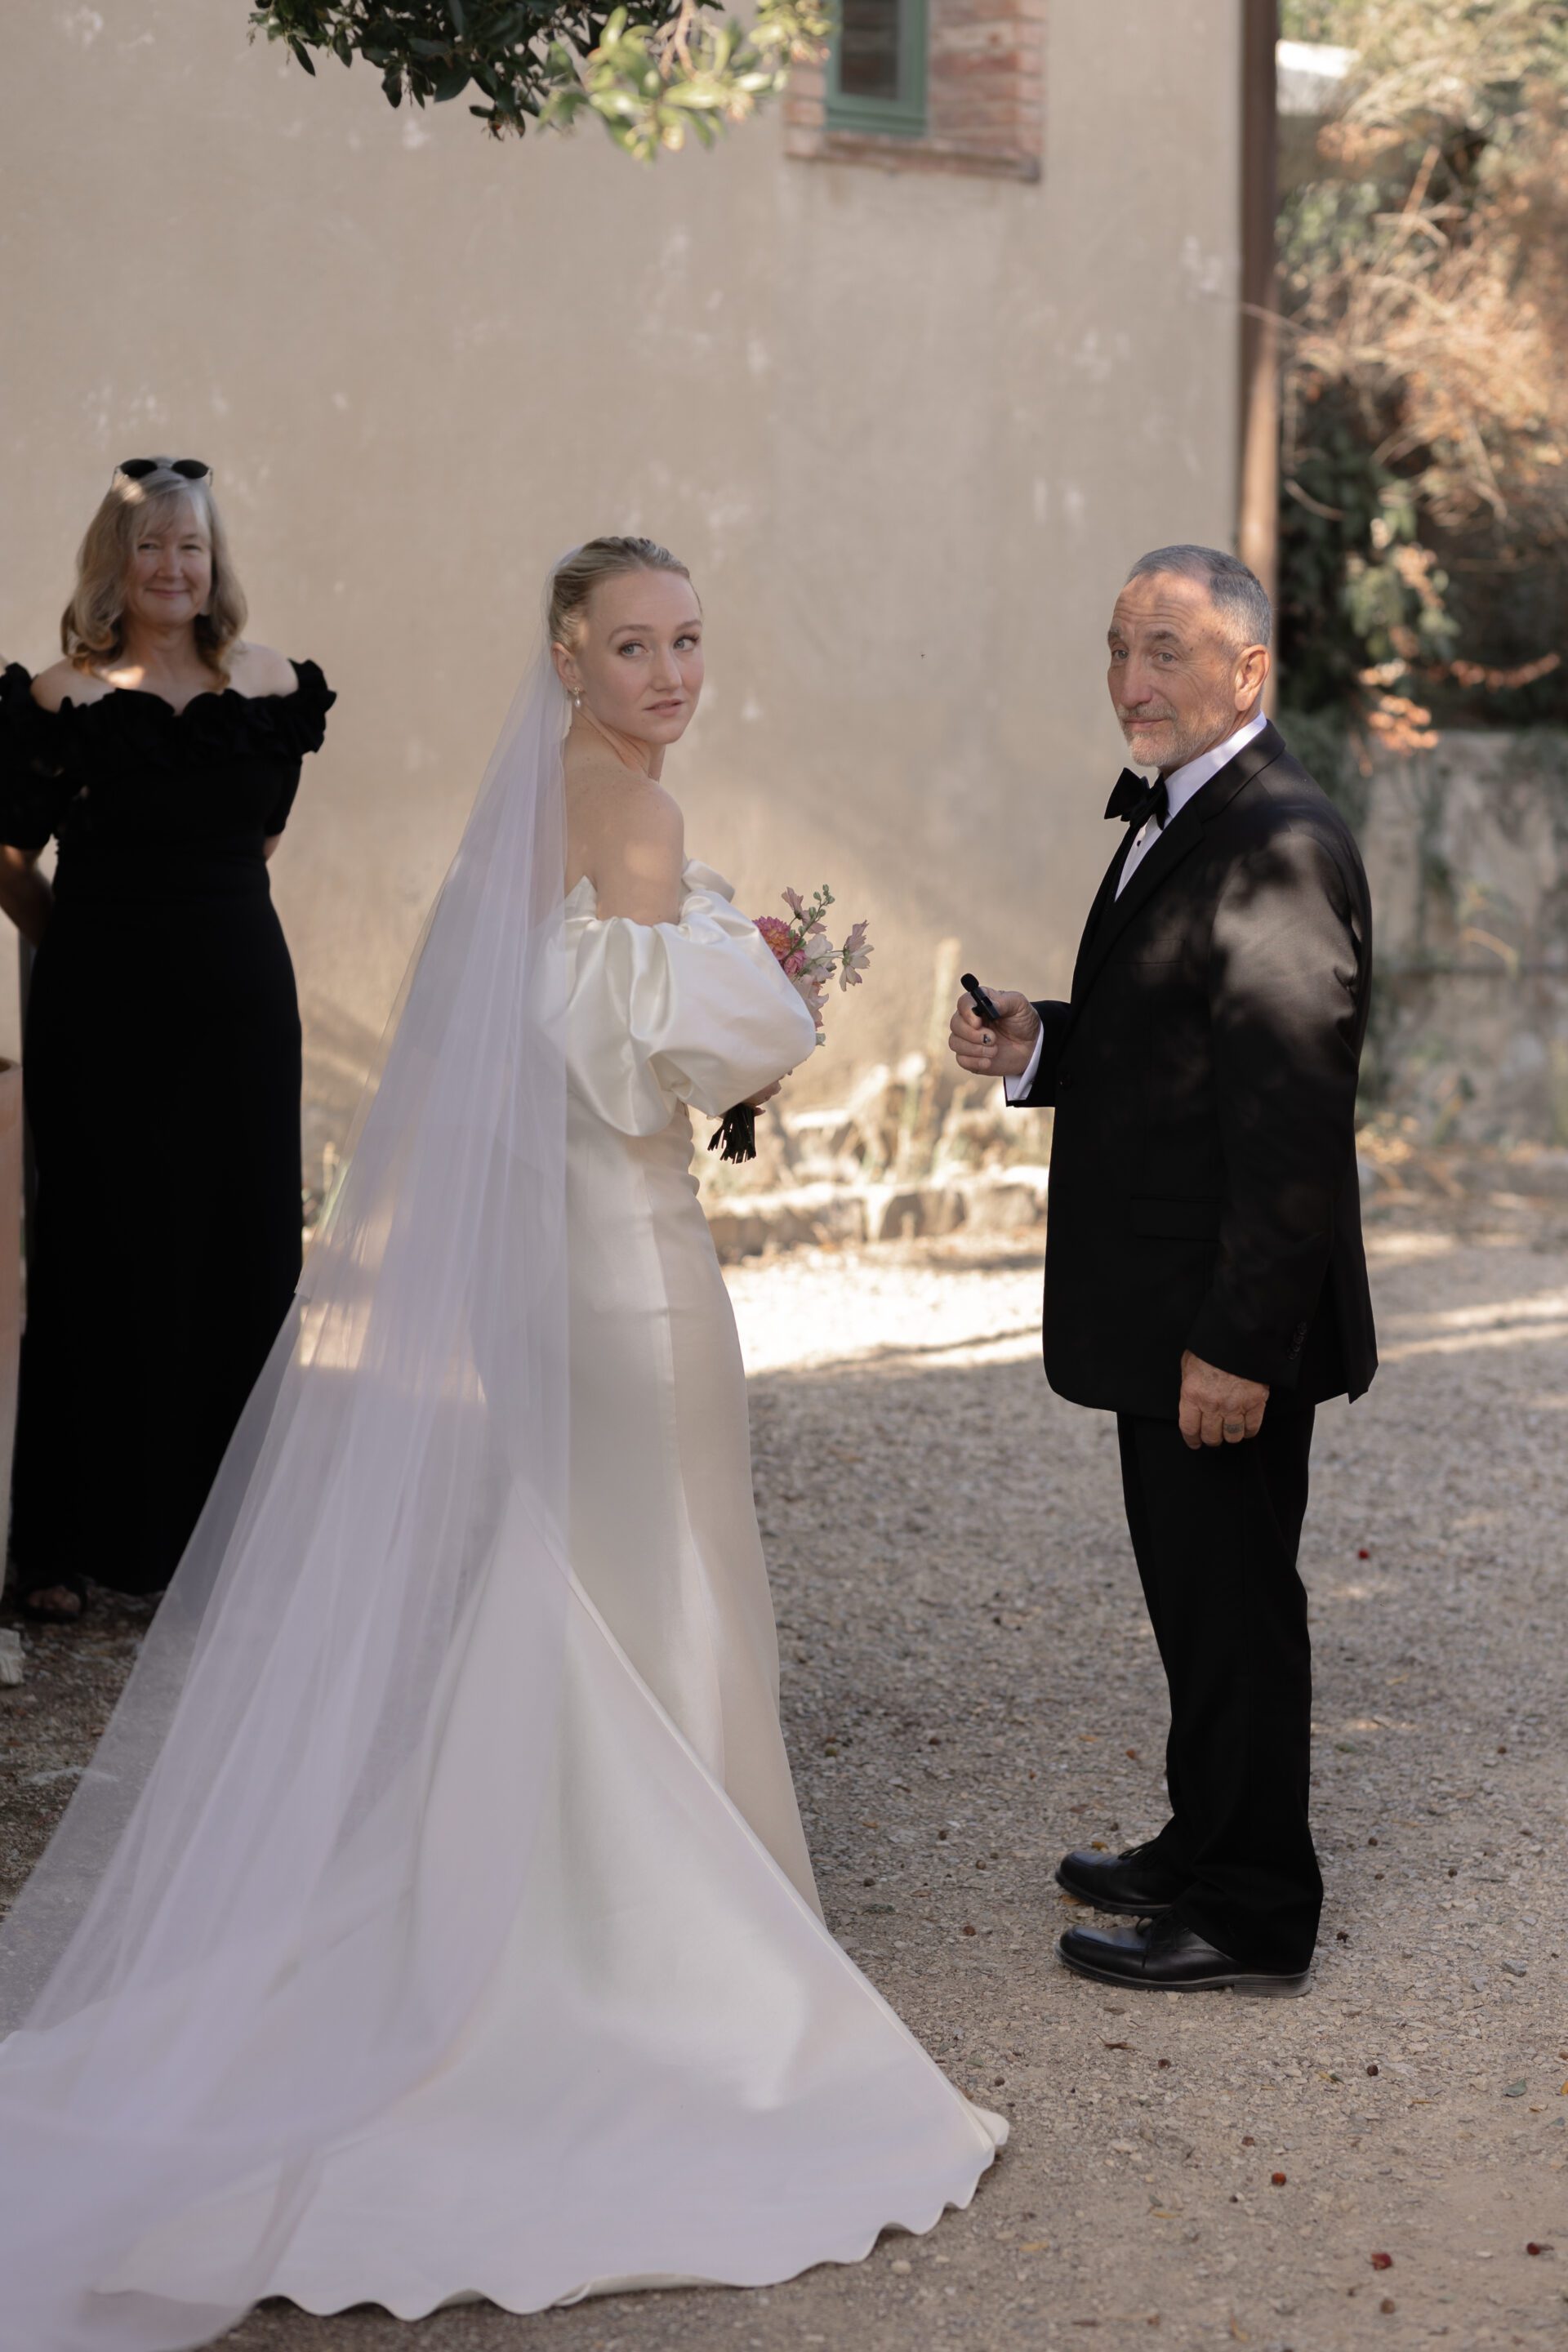 The bride shares a moment with her father before her Tuscan wedding